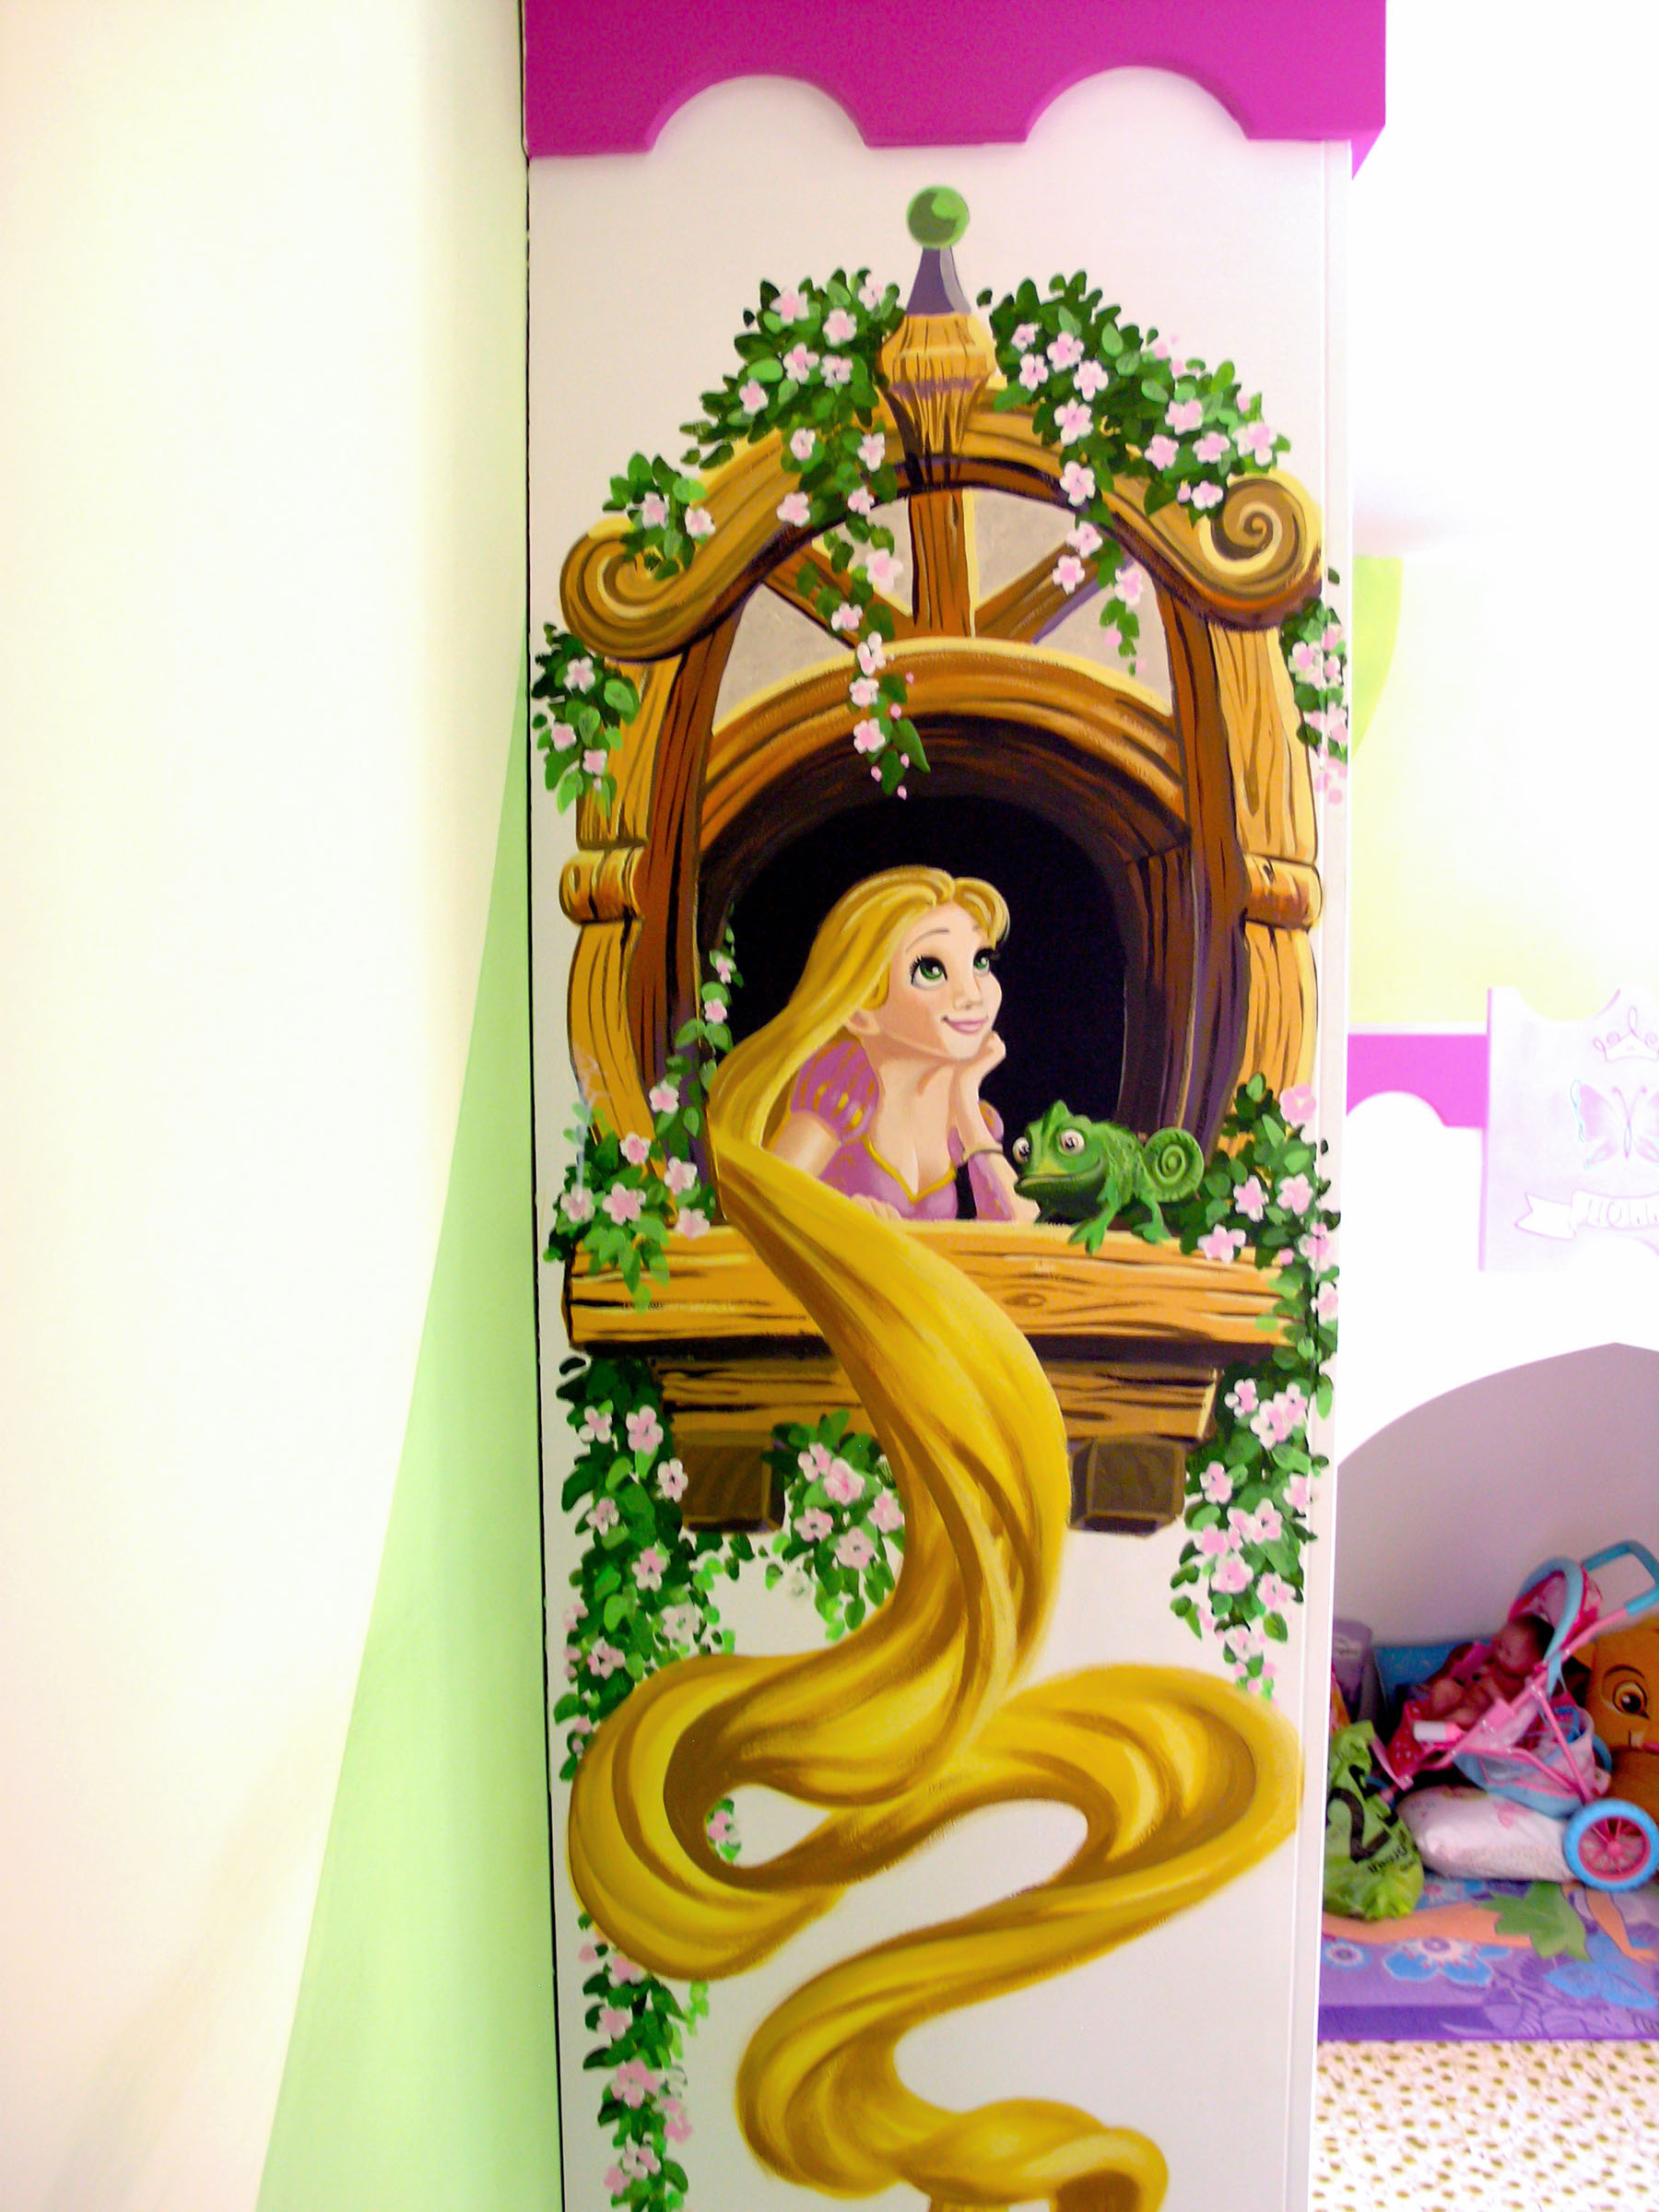 Repunzel on the side of the wardrobe